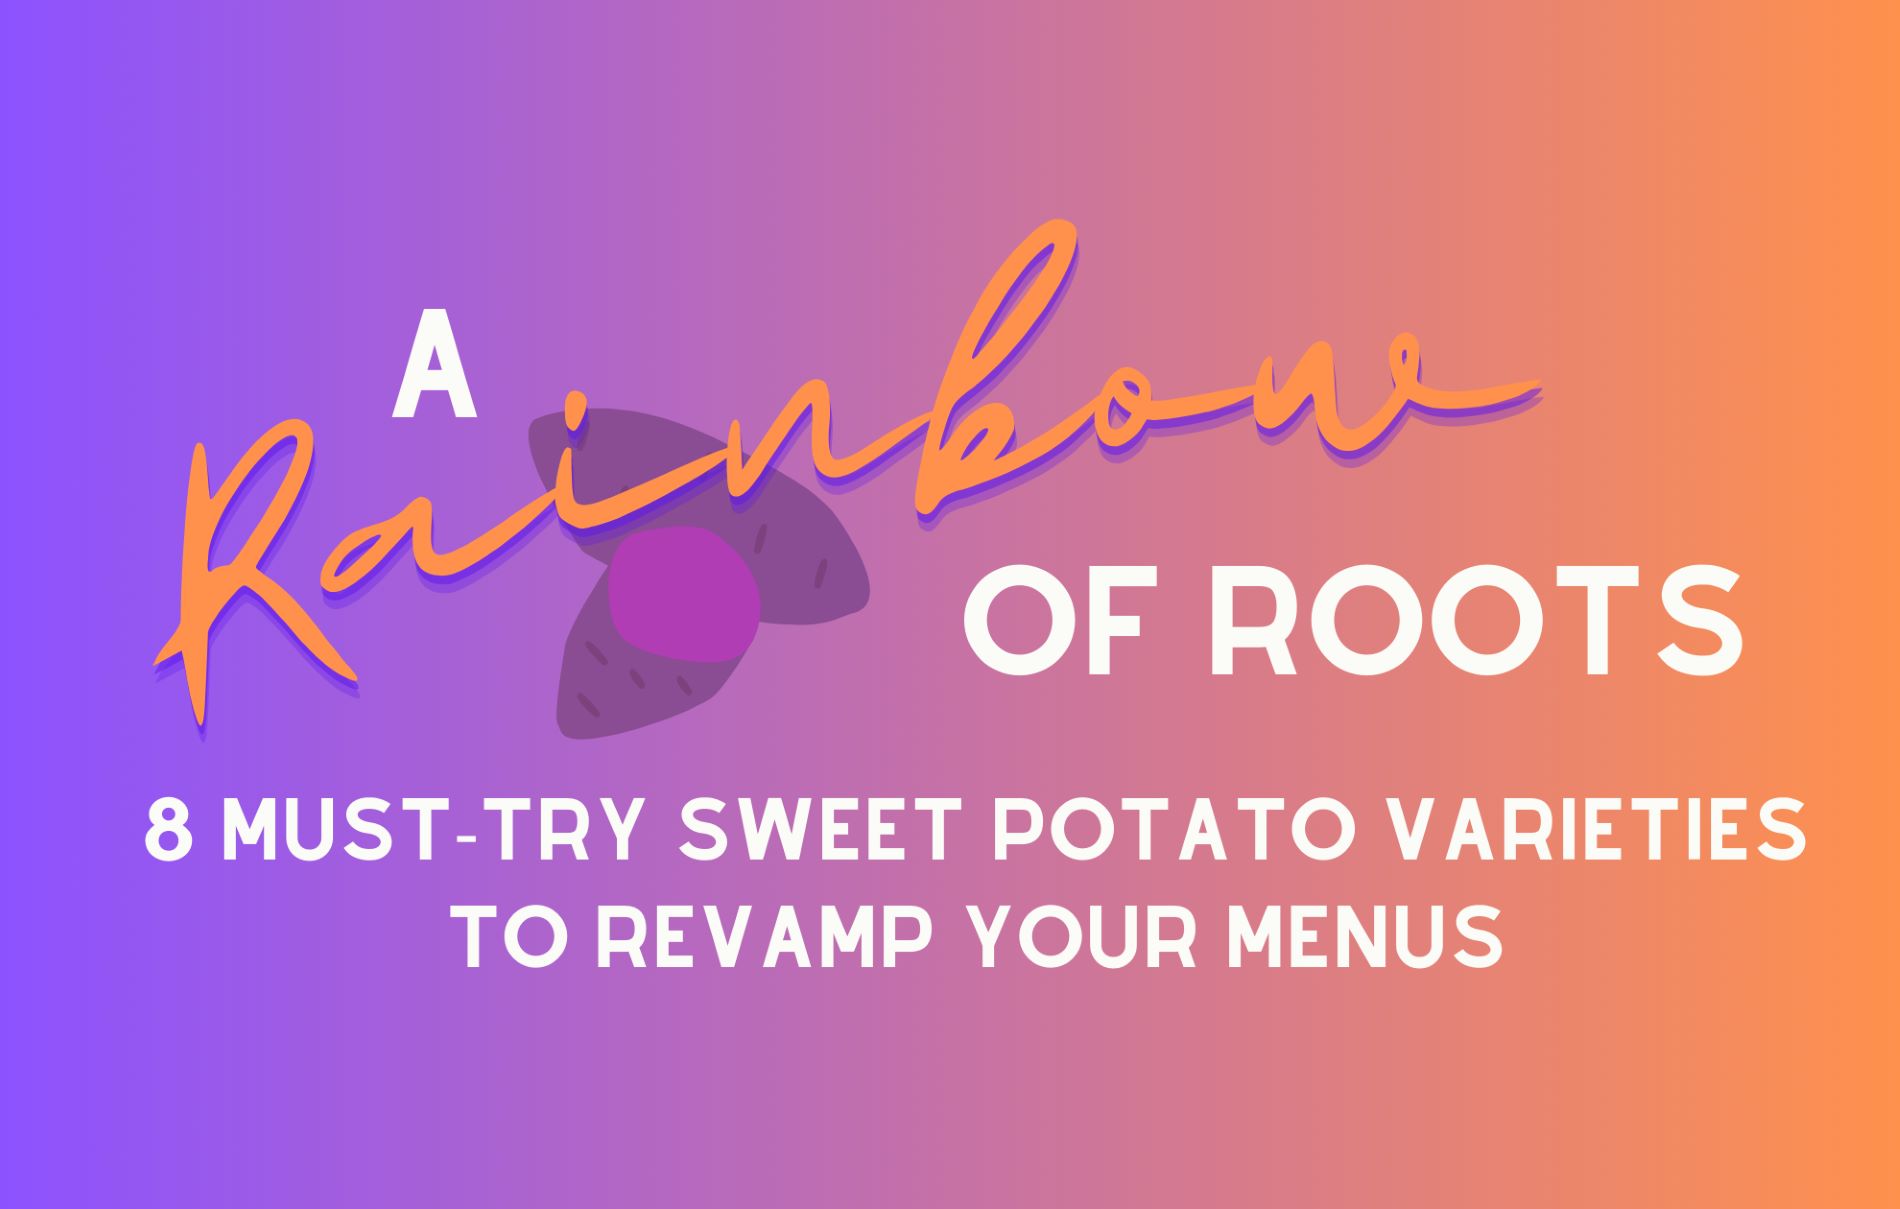 A Rainbow of Roots: 8 Must-Try Sweet Potato Varieties to Revamp Your Menus